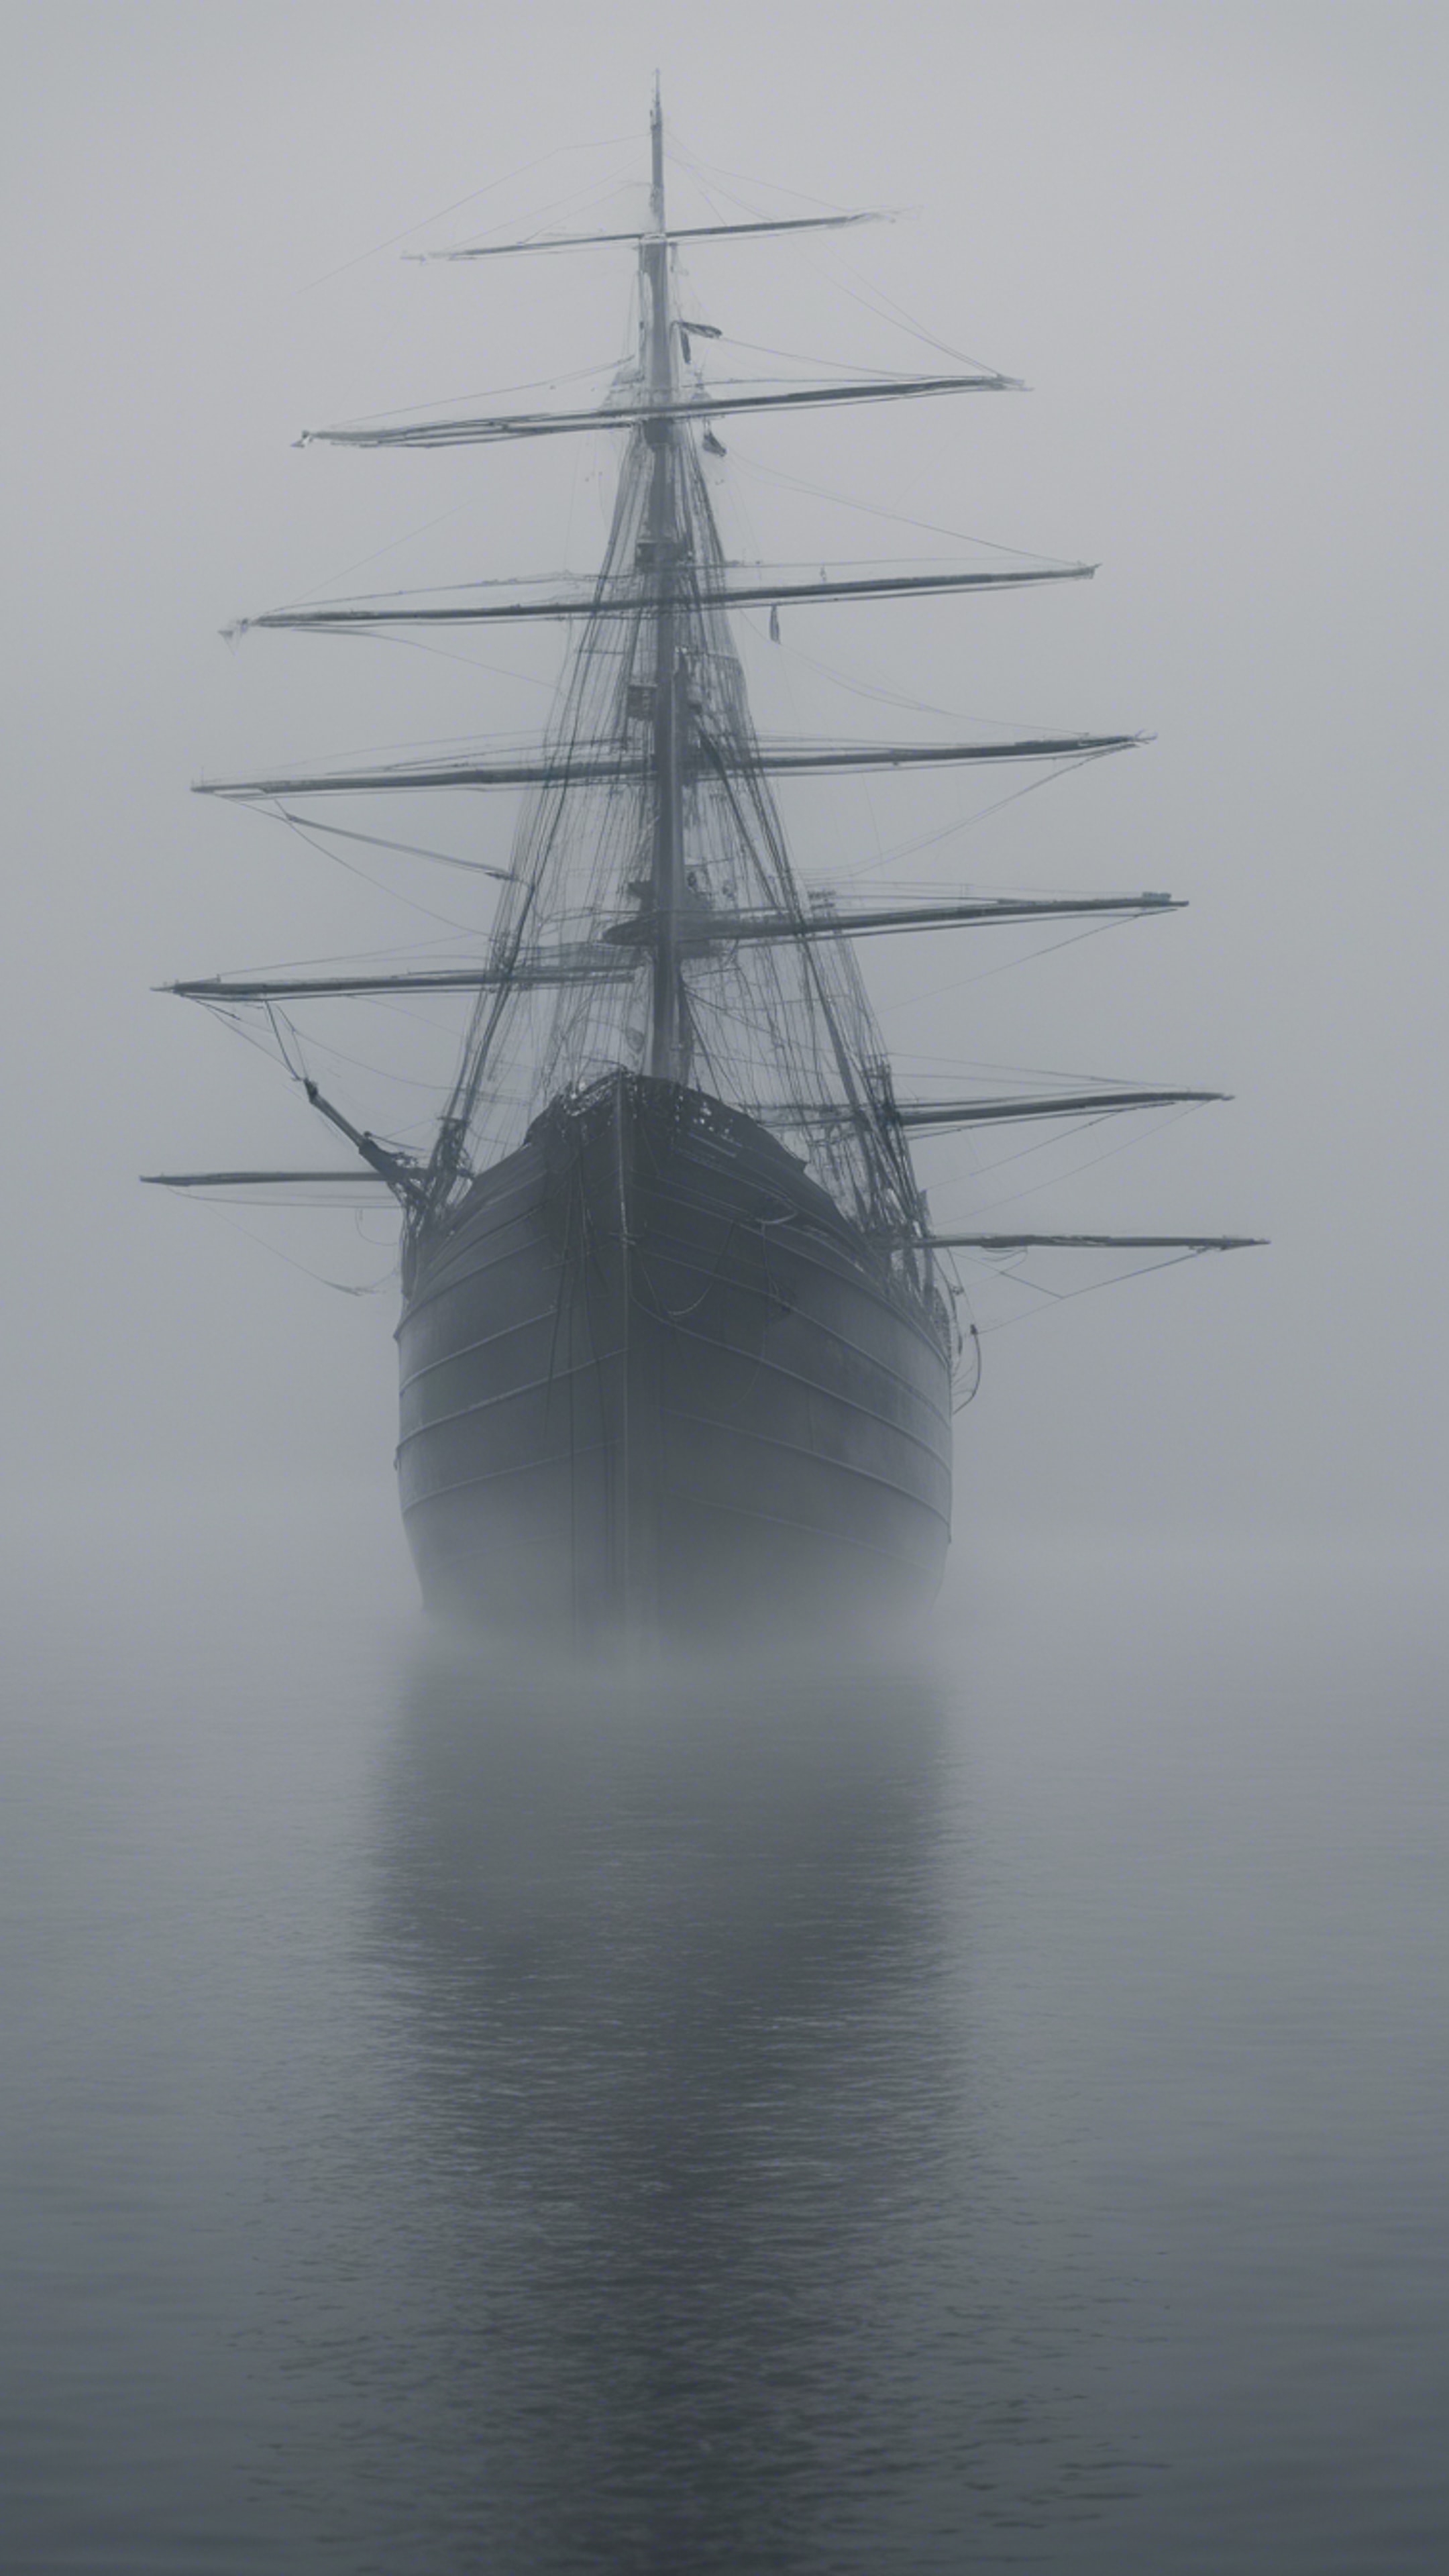 A ghost ship sailing through heavy fog, its masts obscured in drifting grey smoke. Papel de parede[277c5cc3bc0e4445b824]